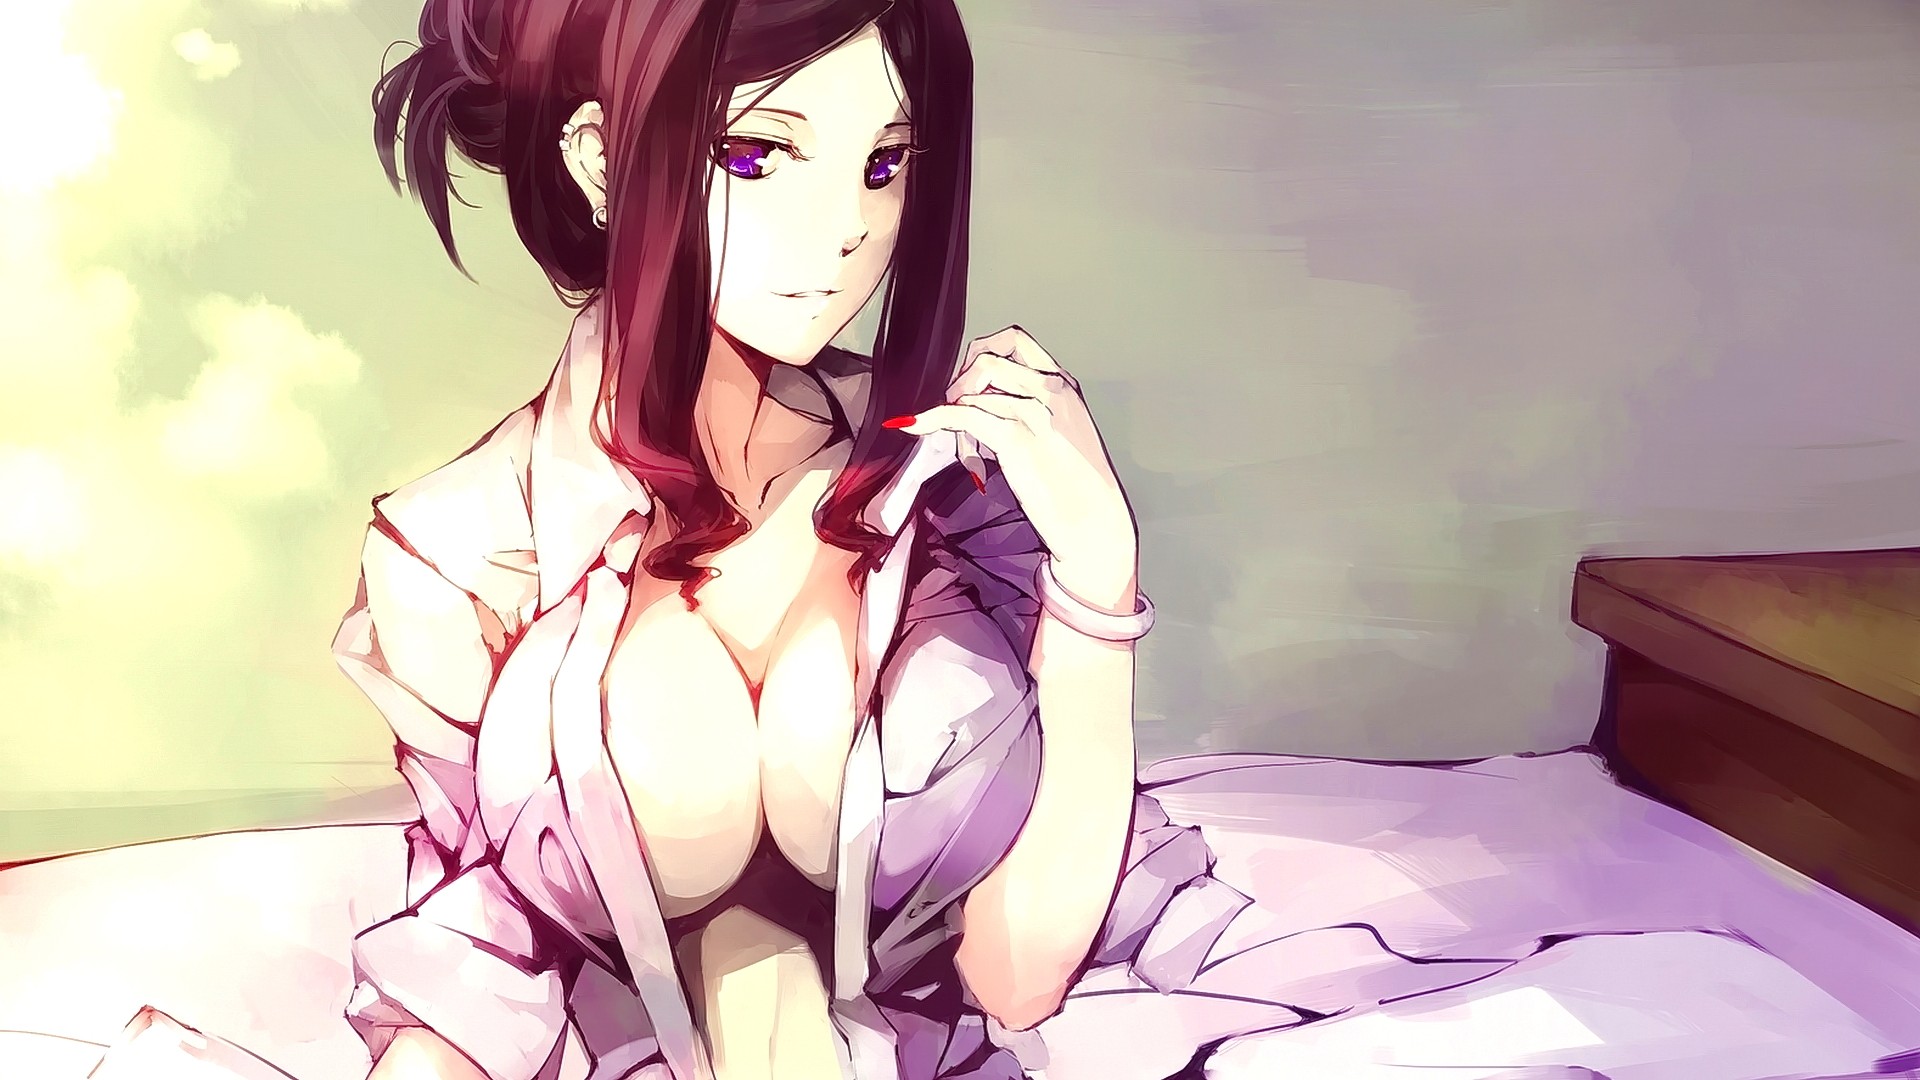 Anime 1920x1080 anime anime girls cleavage open shirt original characters brunette smiling long hair in bed purple eyes boobs big boobs huge breasts women curvy red nails painted nails